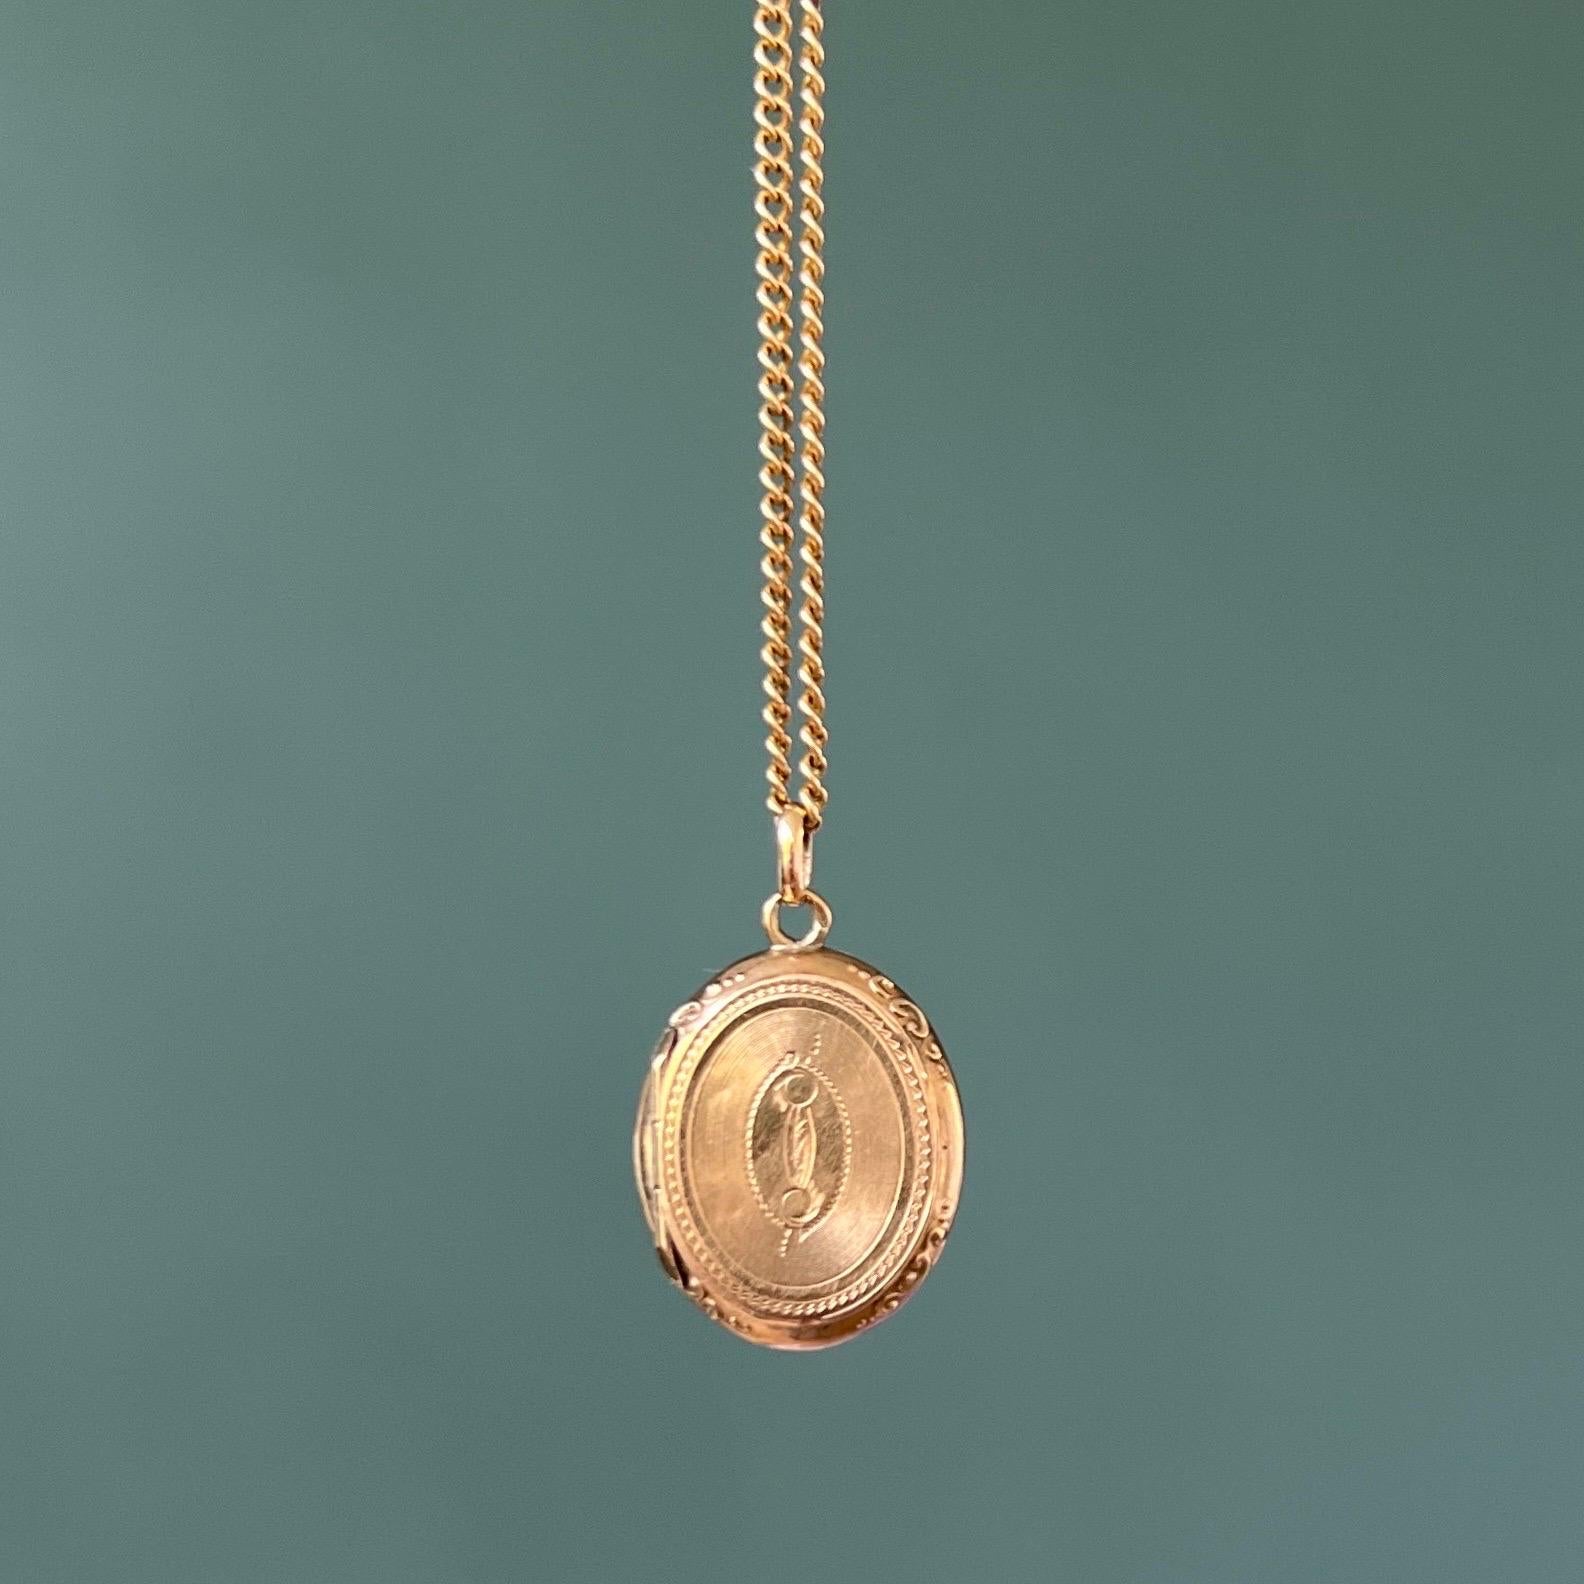 This antique Victorian mourning locket pendant was once worn close to someones heart. The locket pendant dates back to the 19th century and is created in 14 karat gold. The front and back of this oval-shaped pendant is beautifully engraved with